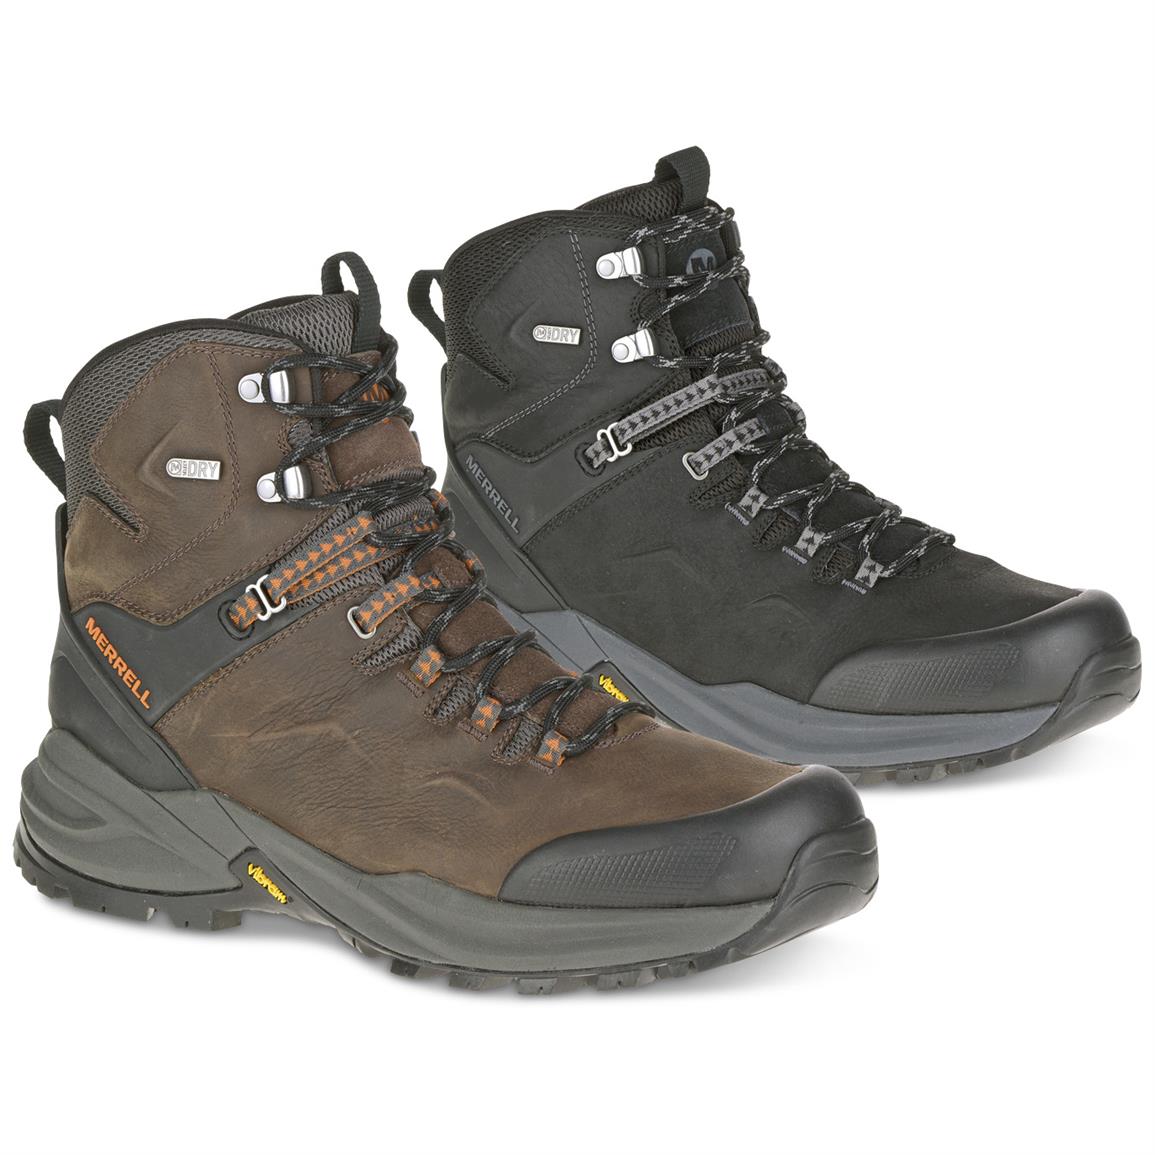 Merrell Men's Phaserbound Hiking Boots, Waterproof - 669946, Hiking ...